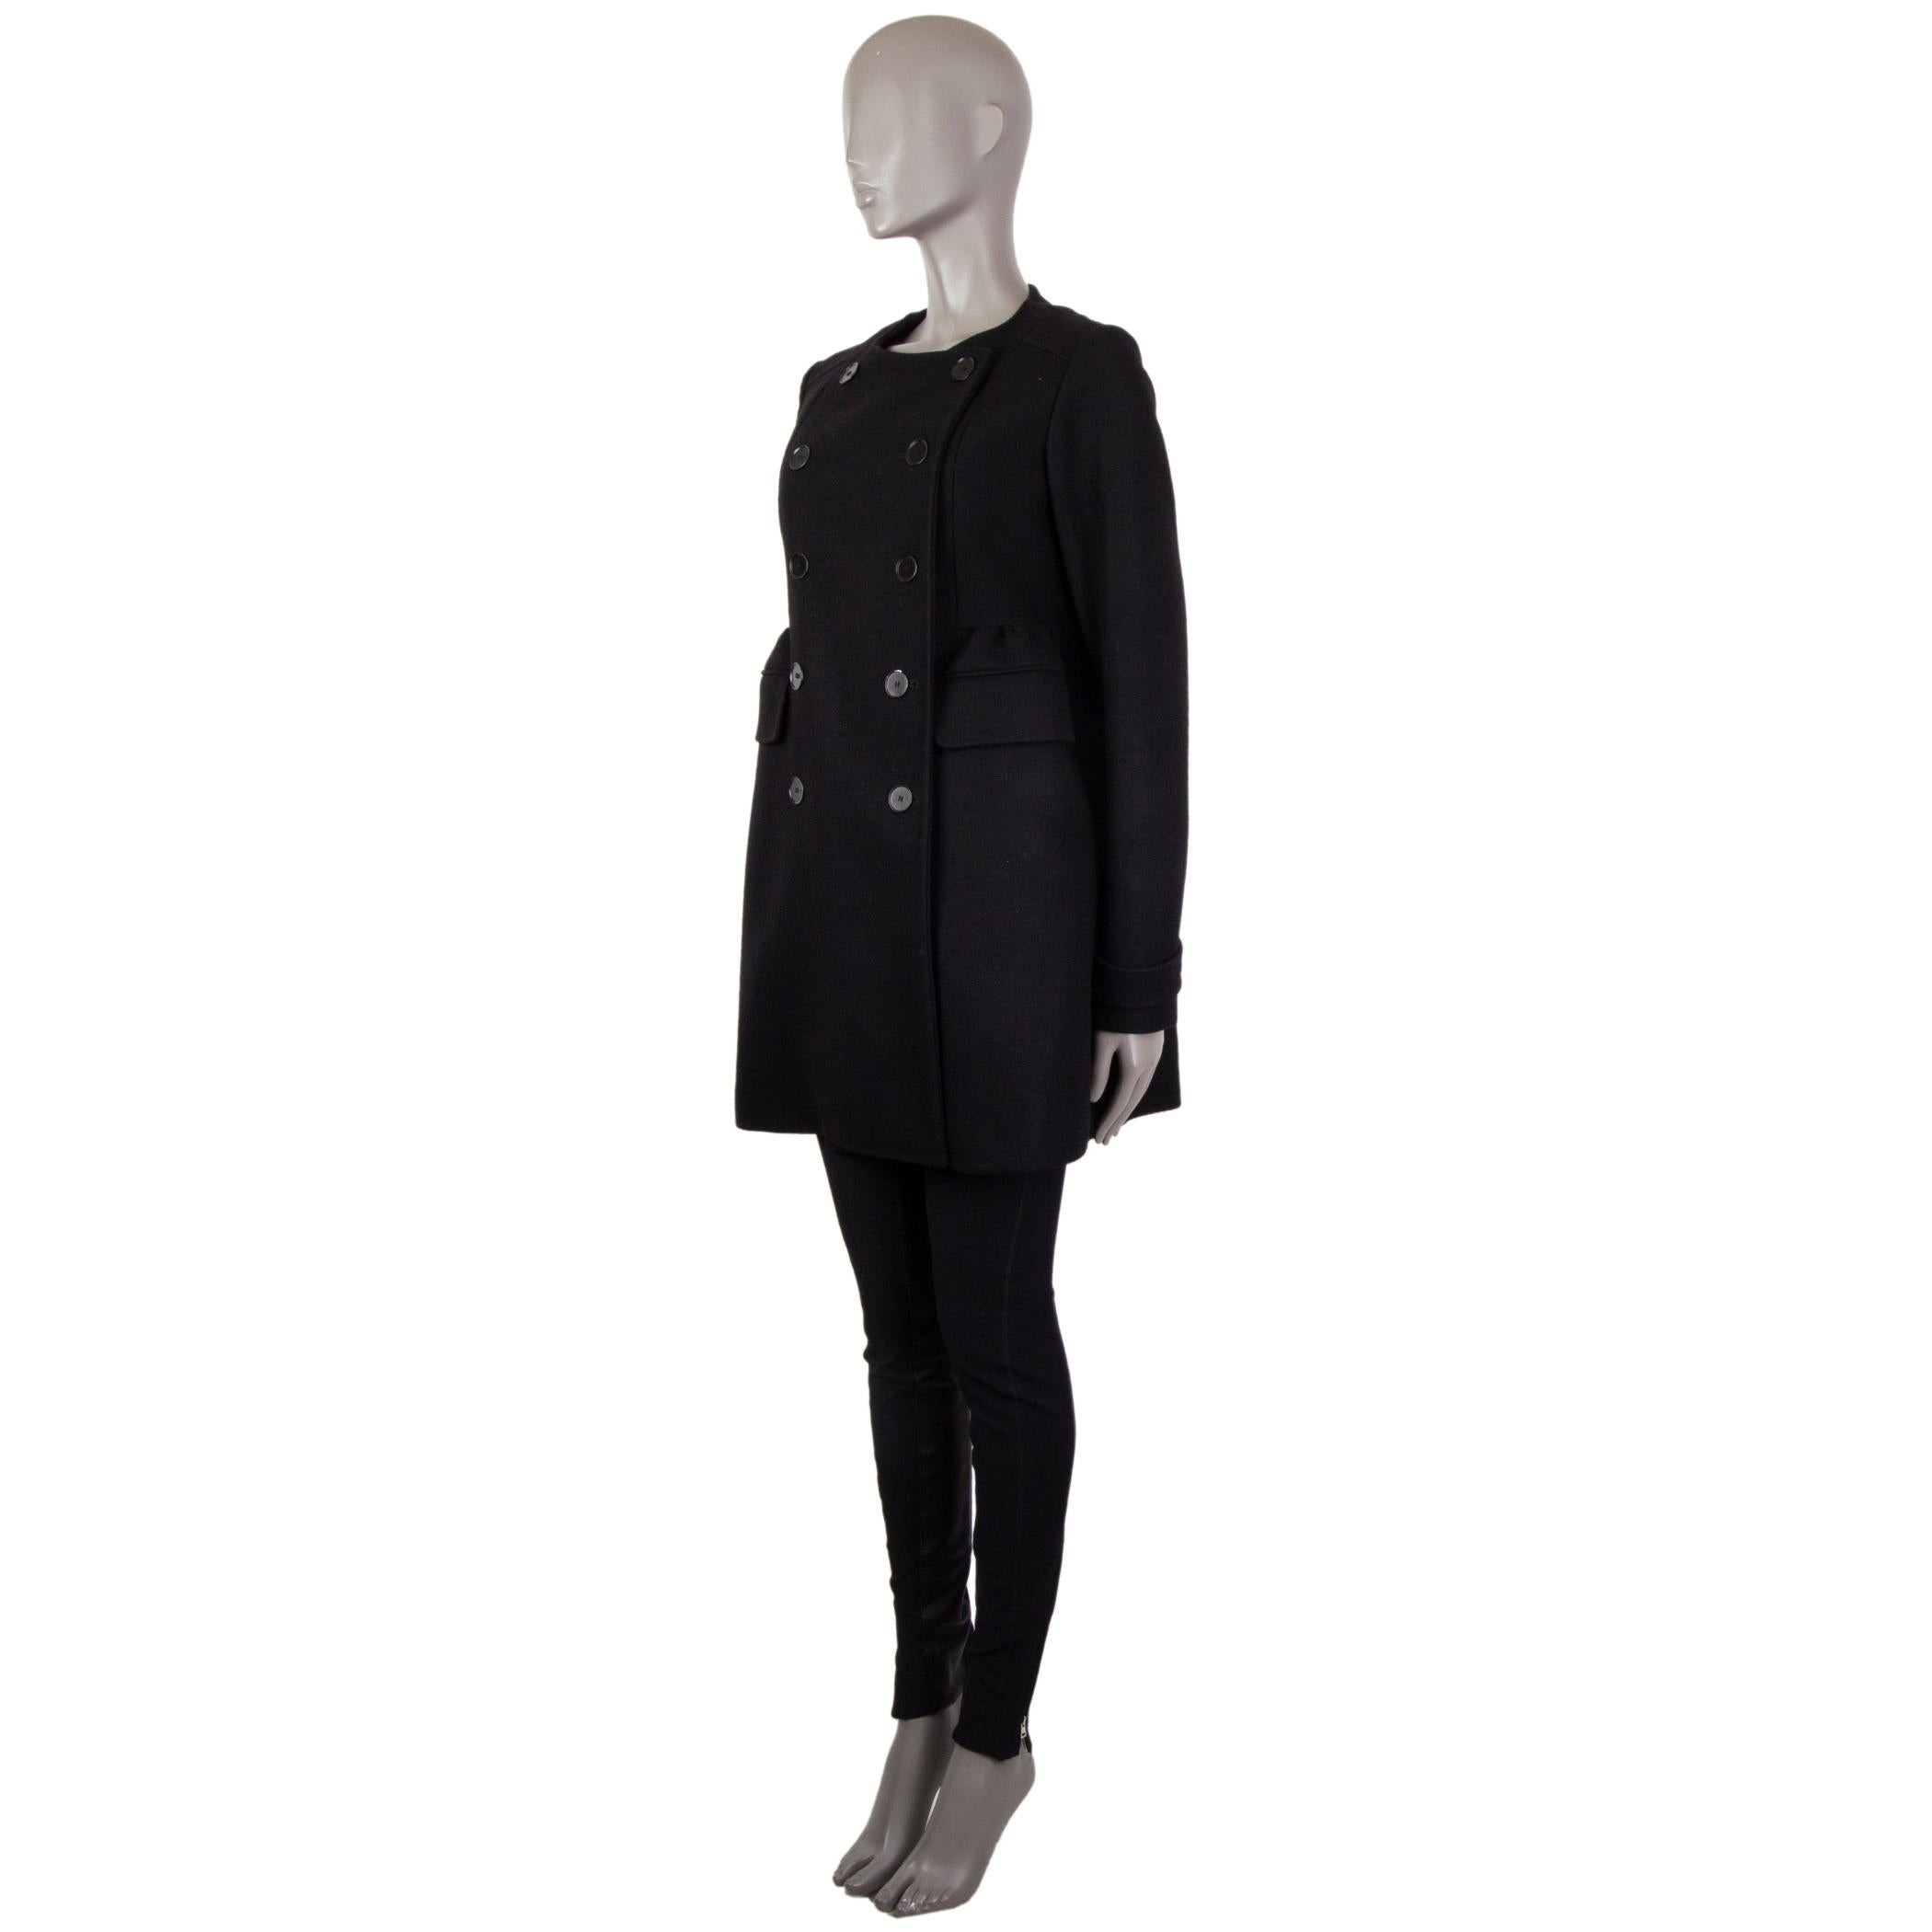 100% authentic Rochas collarless peacoat in black virgin wool (75%), nylon (15%), and cashmere (10%). With bell-shaped gathered waist, pleated back, two flap pockets on the sides, and buttoned cuff straps. Closes with black buttons on the front.